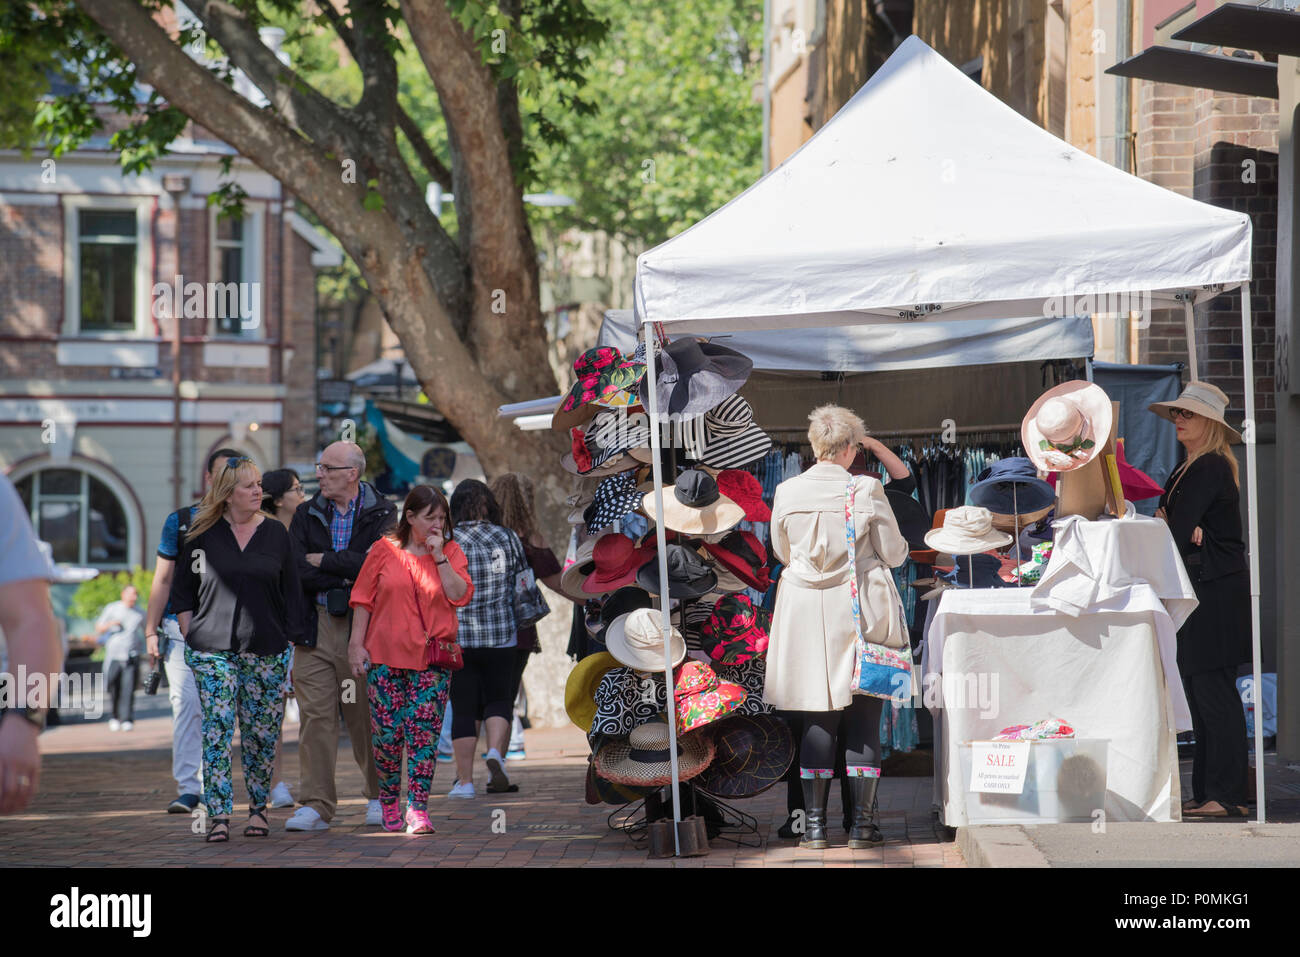 Market stalls selling fashion and art, part of a large weekend market in Sydney's historic Rocks Precinct in New South Wales, Australia Stock Photo